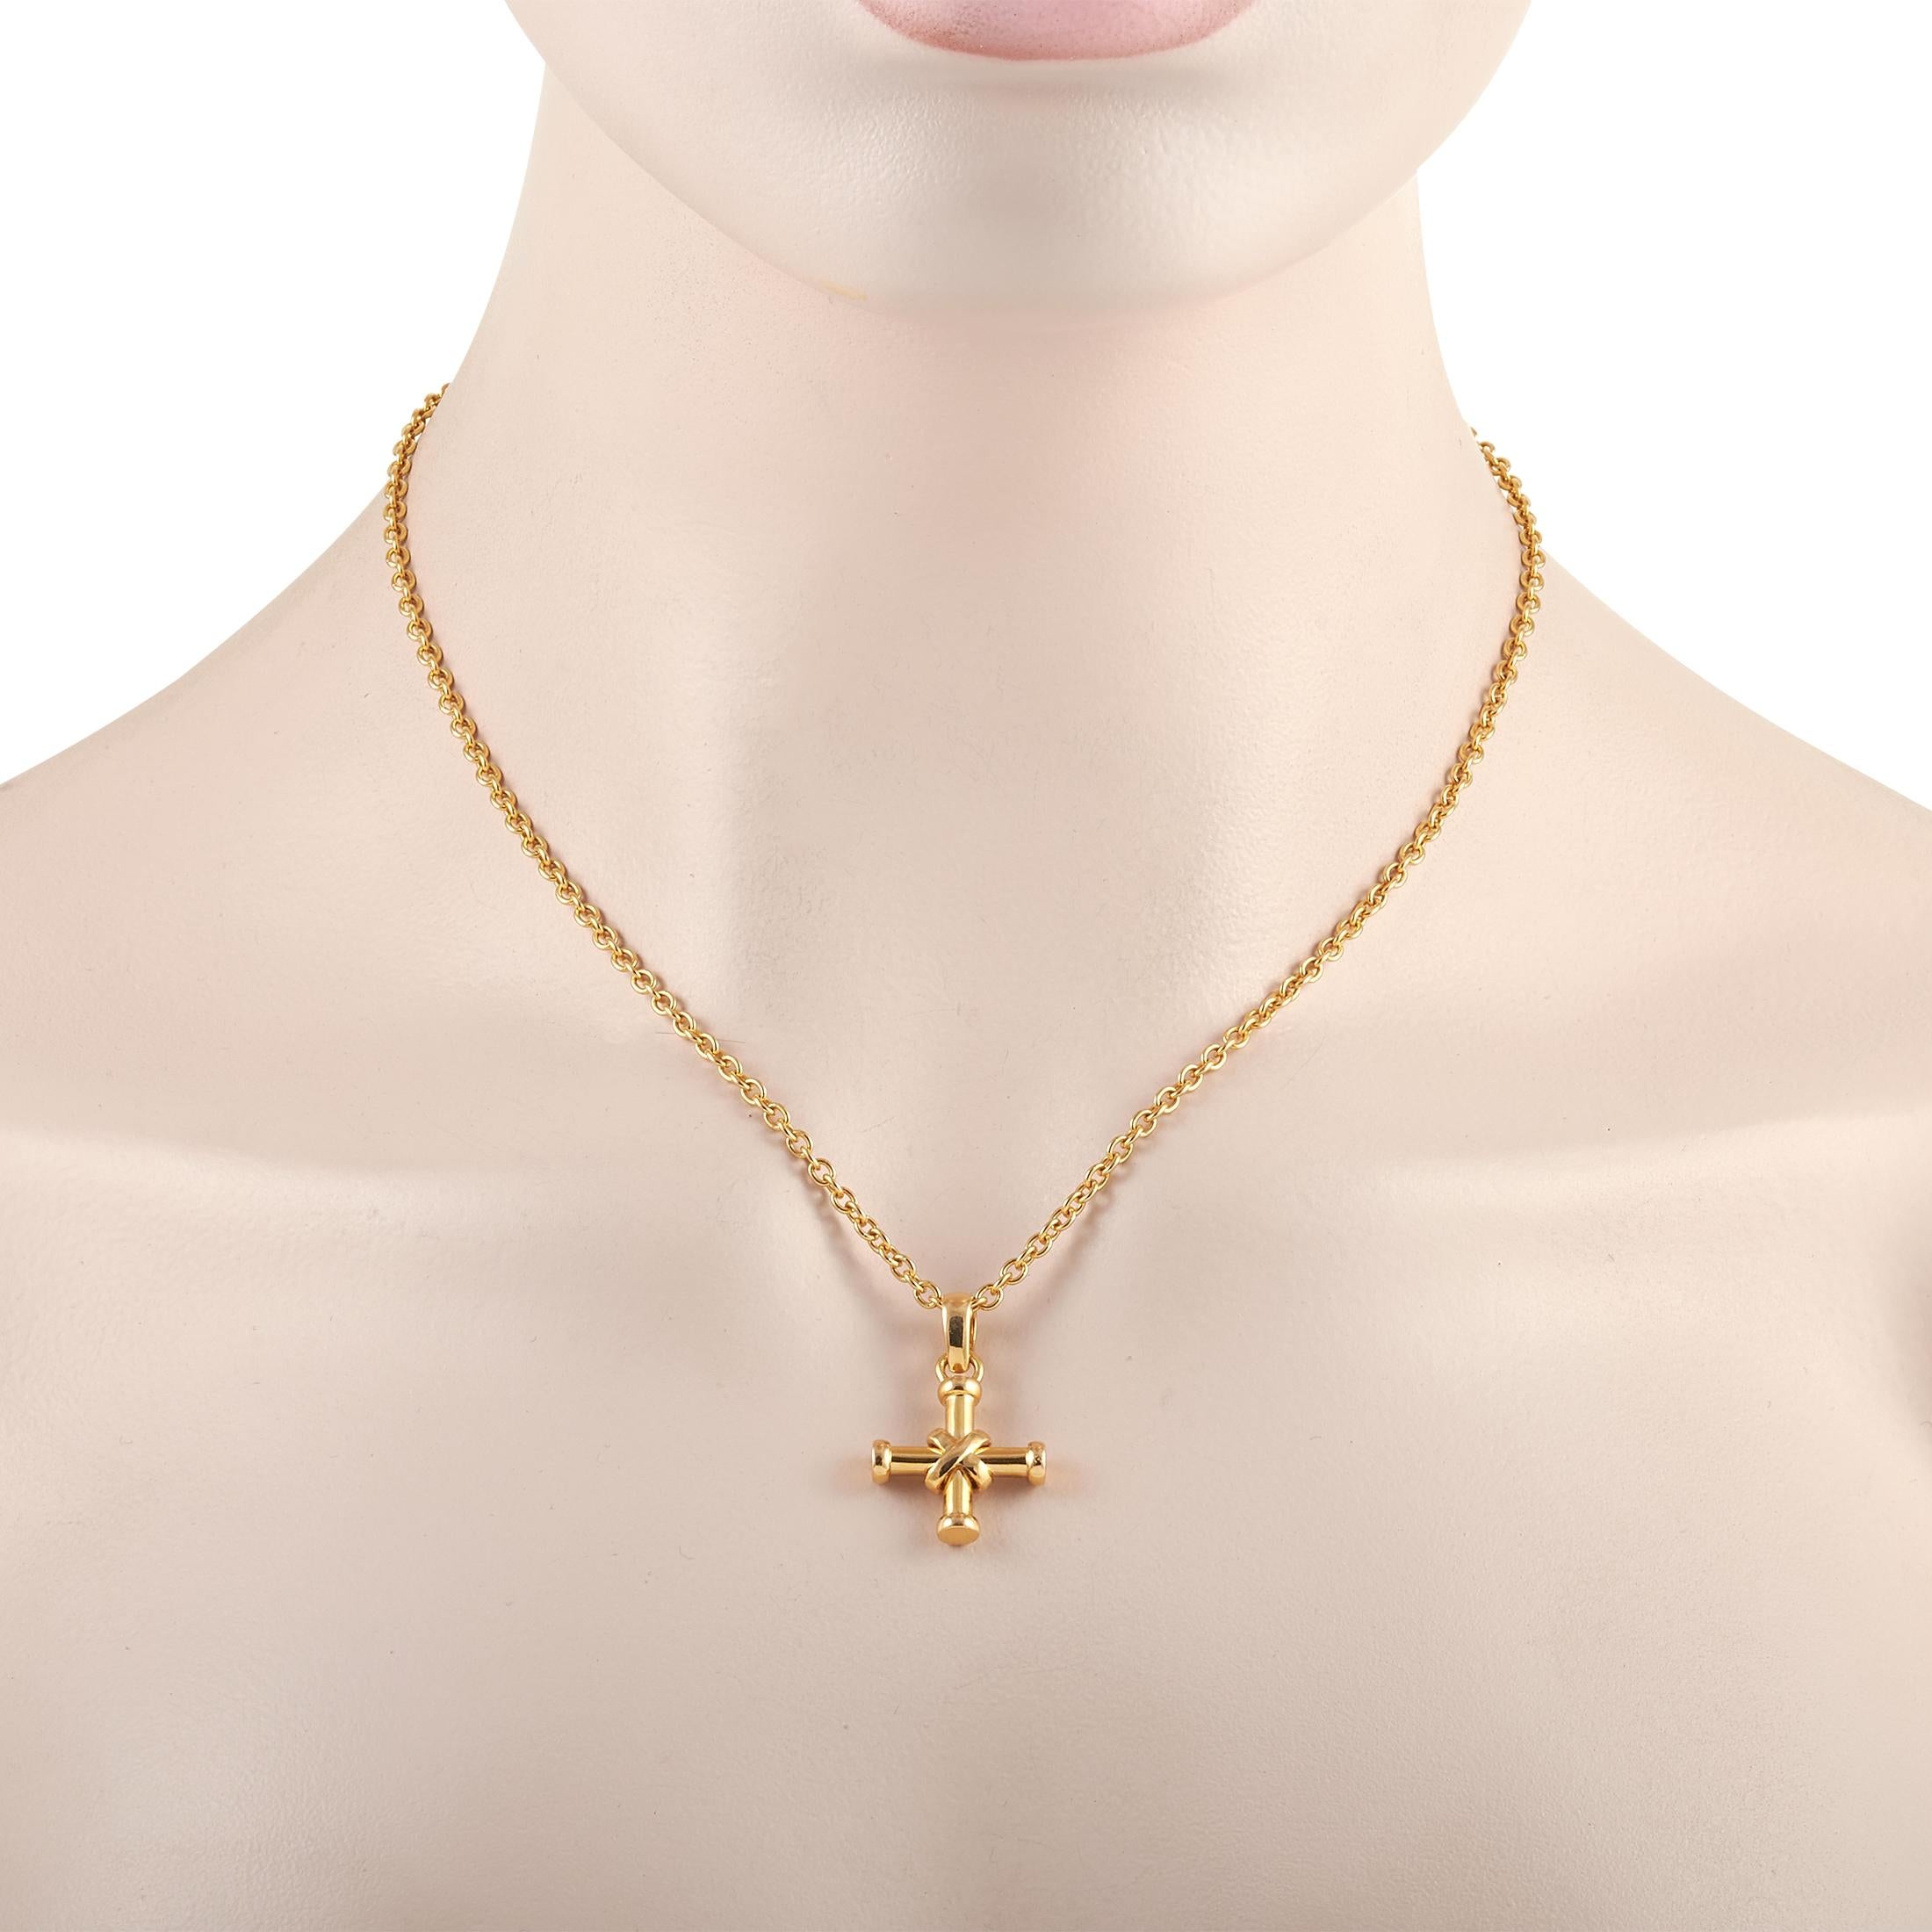 This Bvlgari 18K Yellow Gold Cross Necklace is made with an 18K yellow gold chain highlighting a matching 18K yellow gold cross. The chain measures 17 inches in length and features a lobster closure. The cross pendant measures 1.13 inches in length